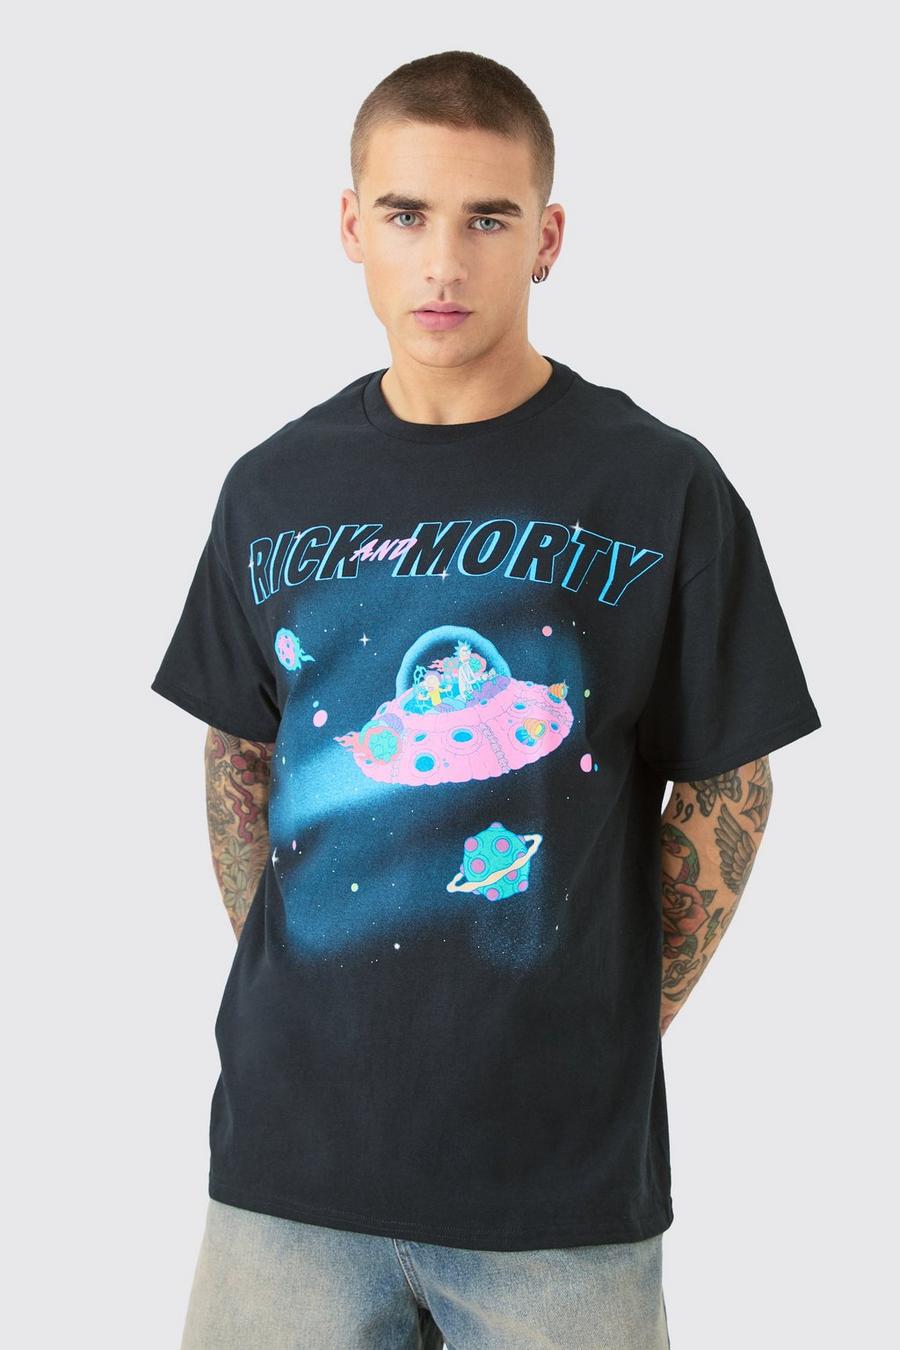 T-shirt oversize ufficiale Rick & Morty Space, Black